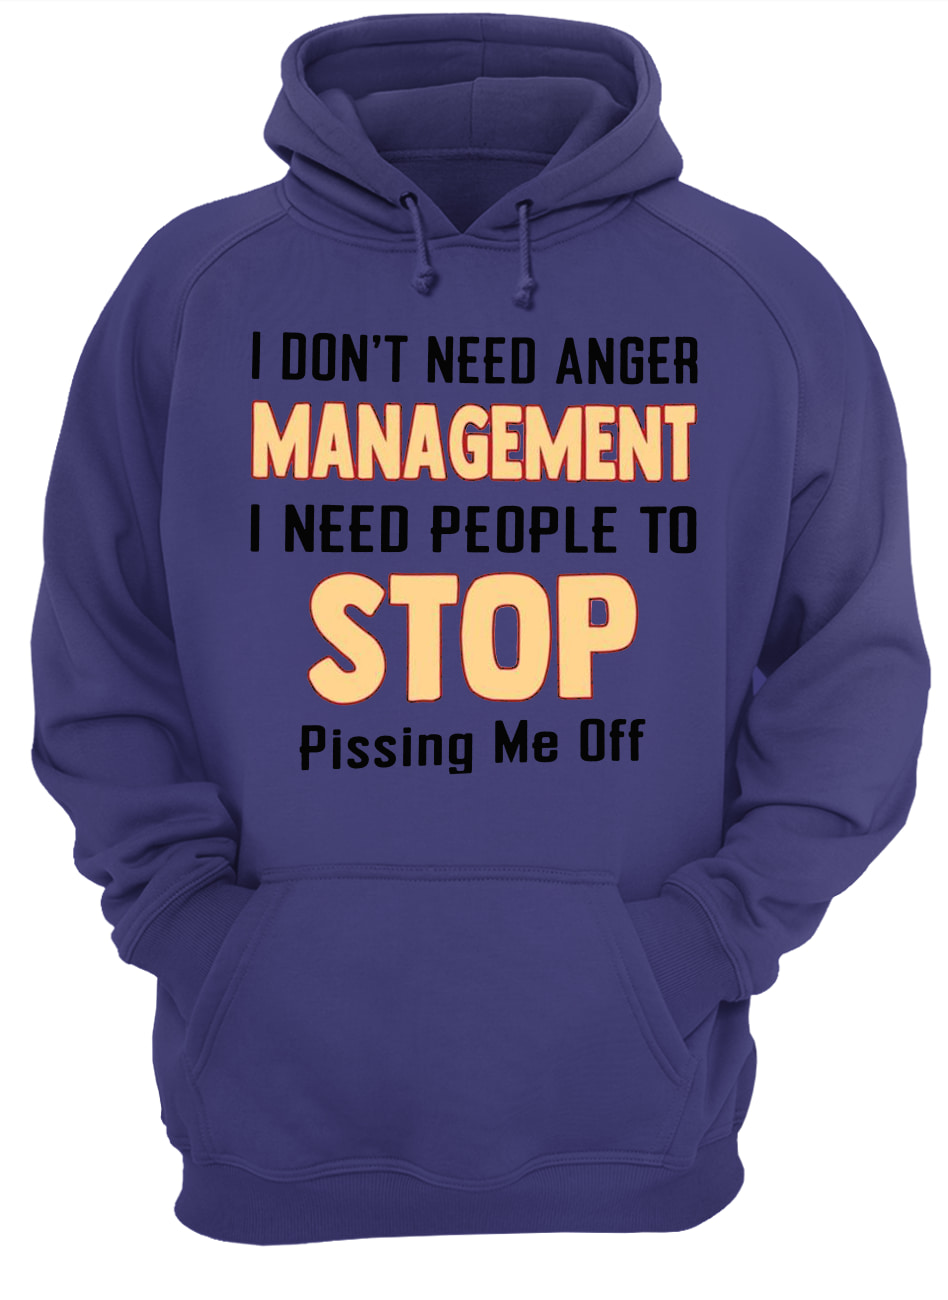 I don't need anger management I need people to stop pissing me off hoodie